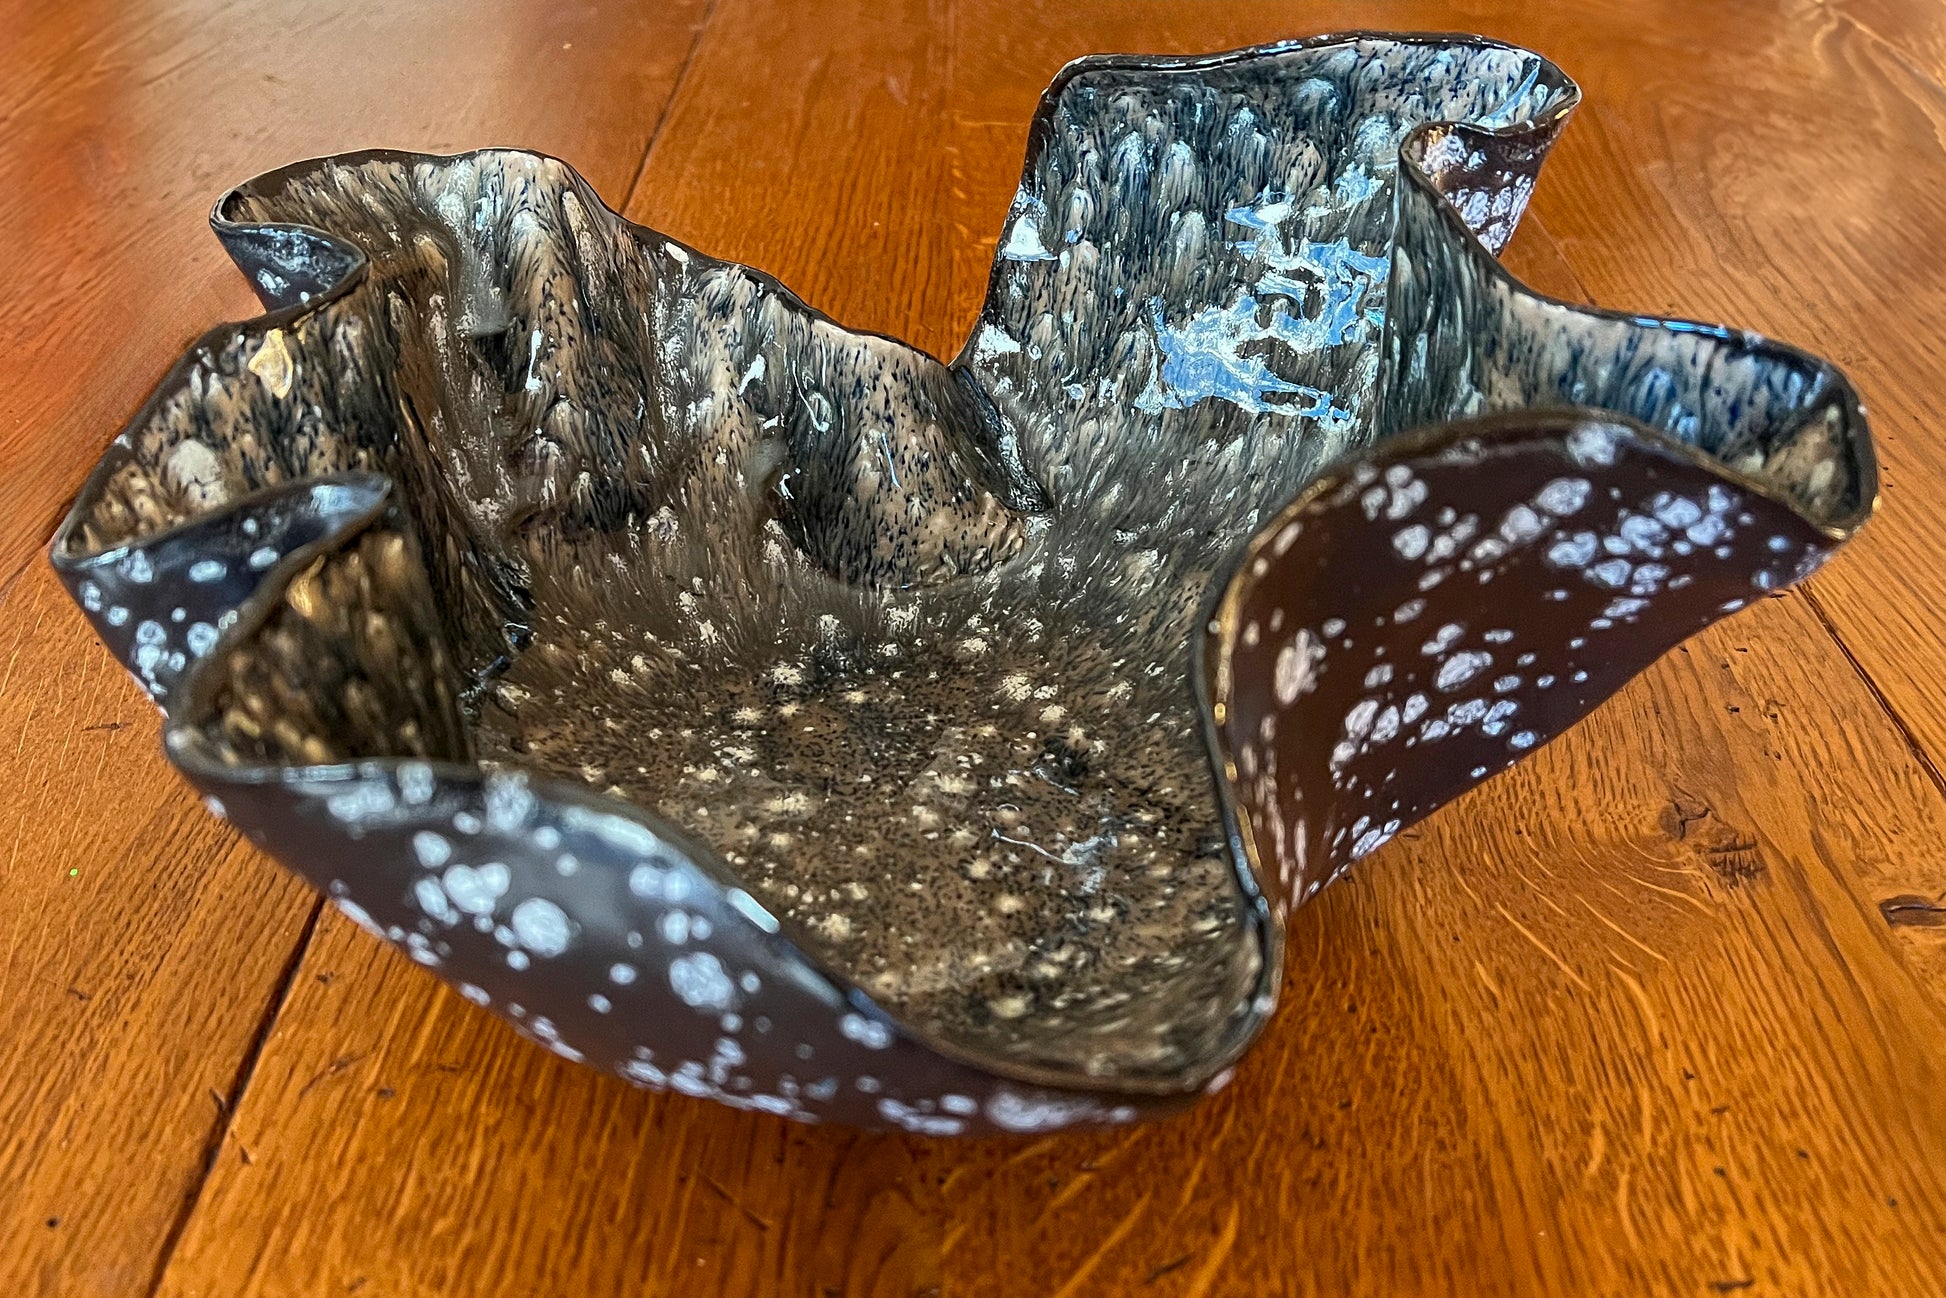 Free form black ceramic bowl with white crystal glazing on the interior of the bowl and black and white speckled glaze on the outside